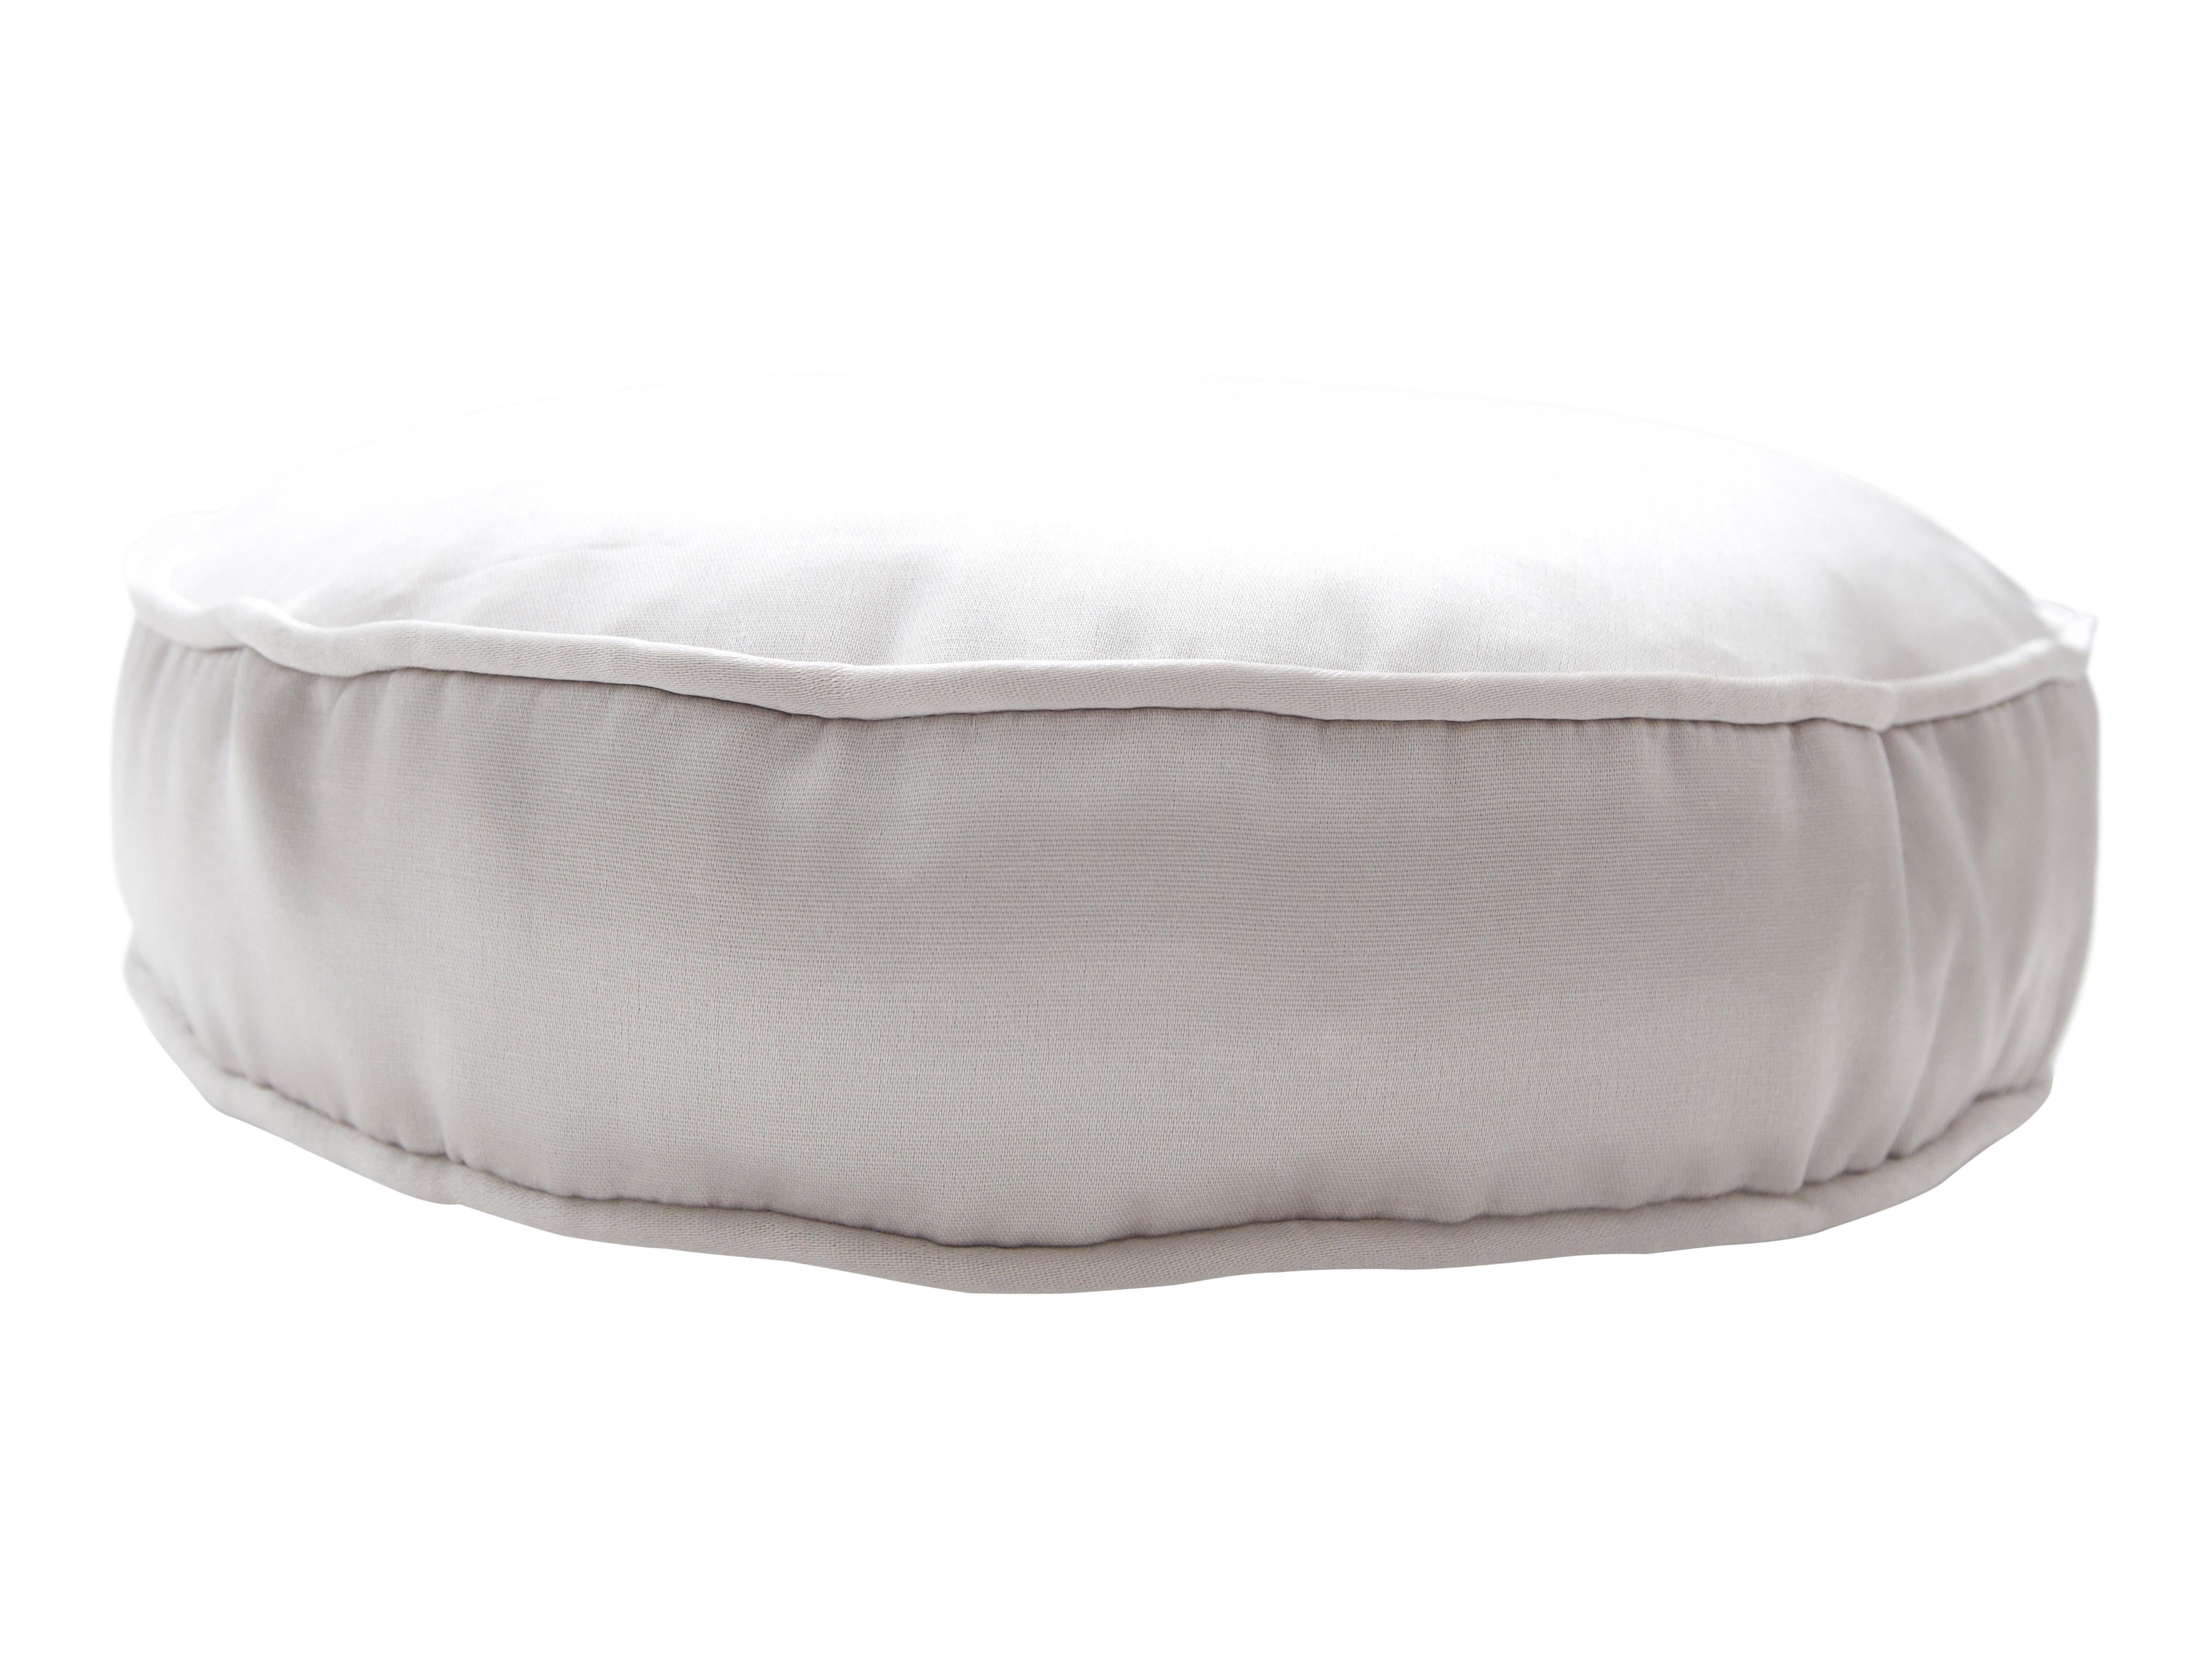 American Handcrafted Lustrous Fabric Subtle Sheen Round Box Pillow Hypoallergenic For Sale